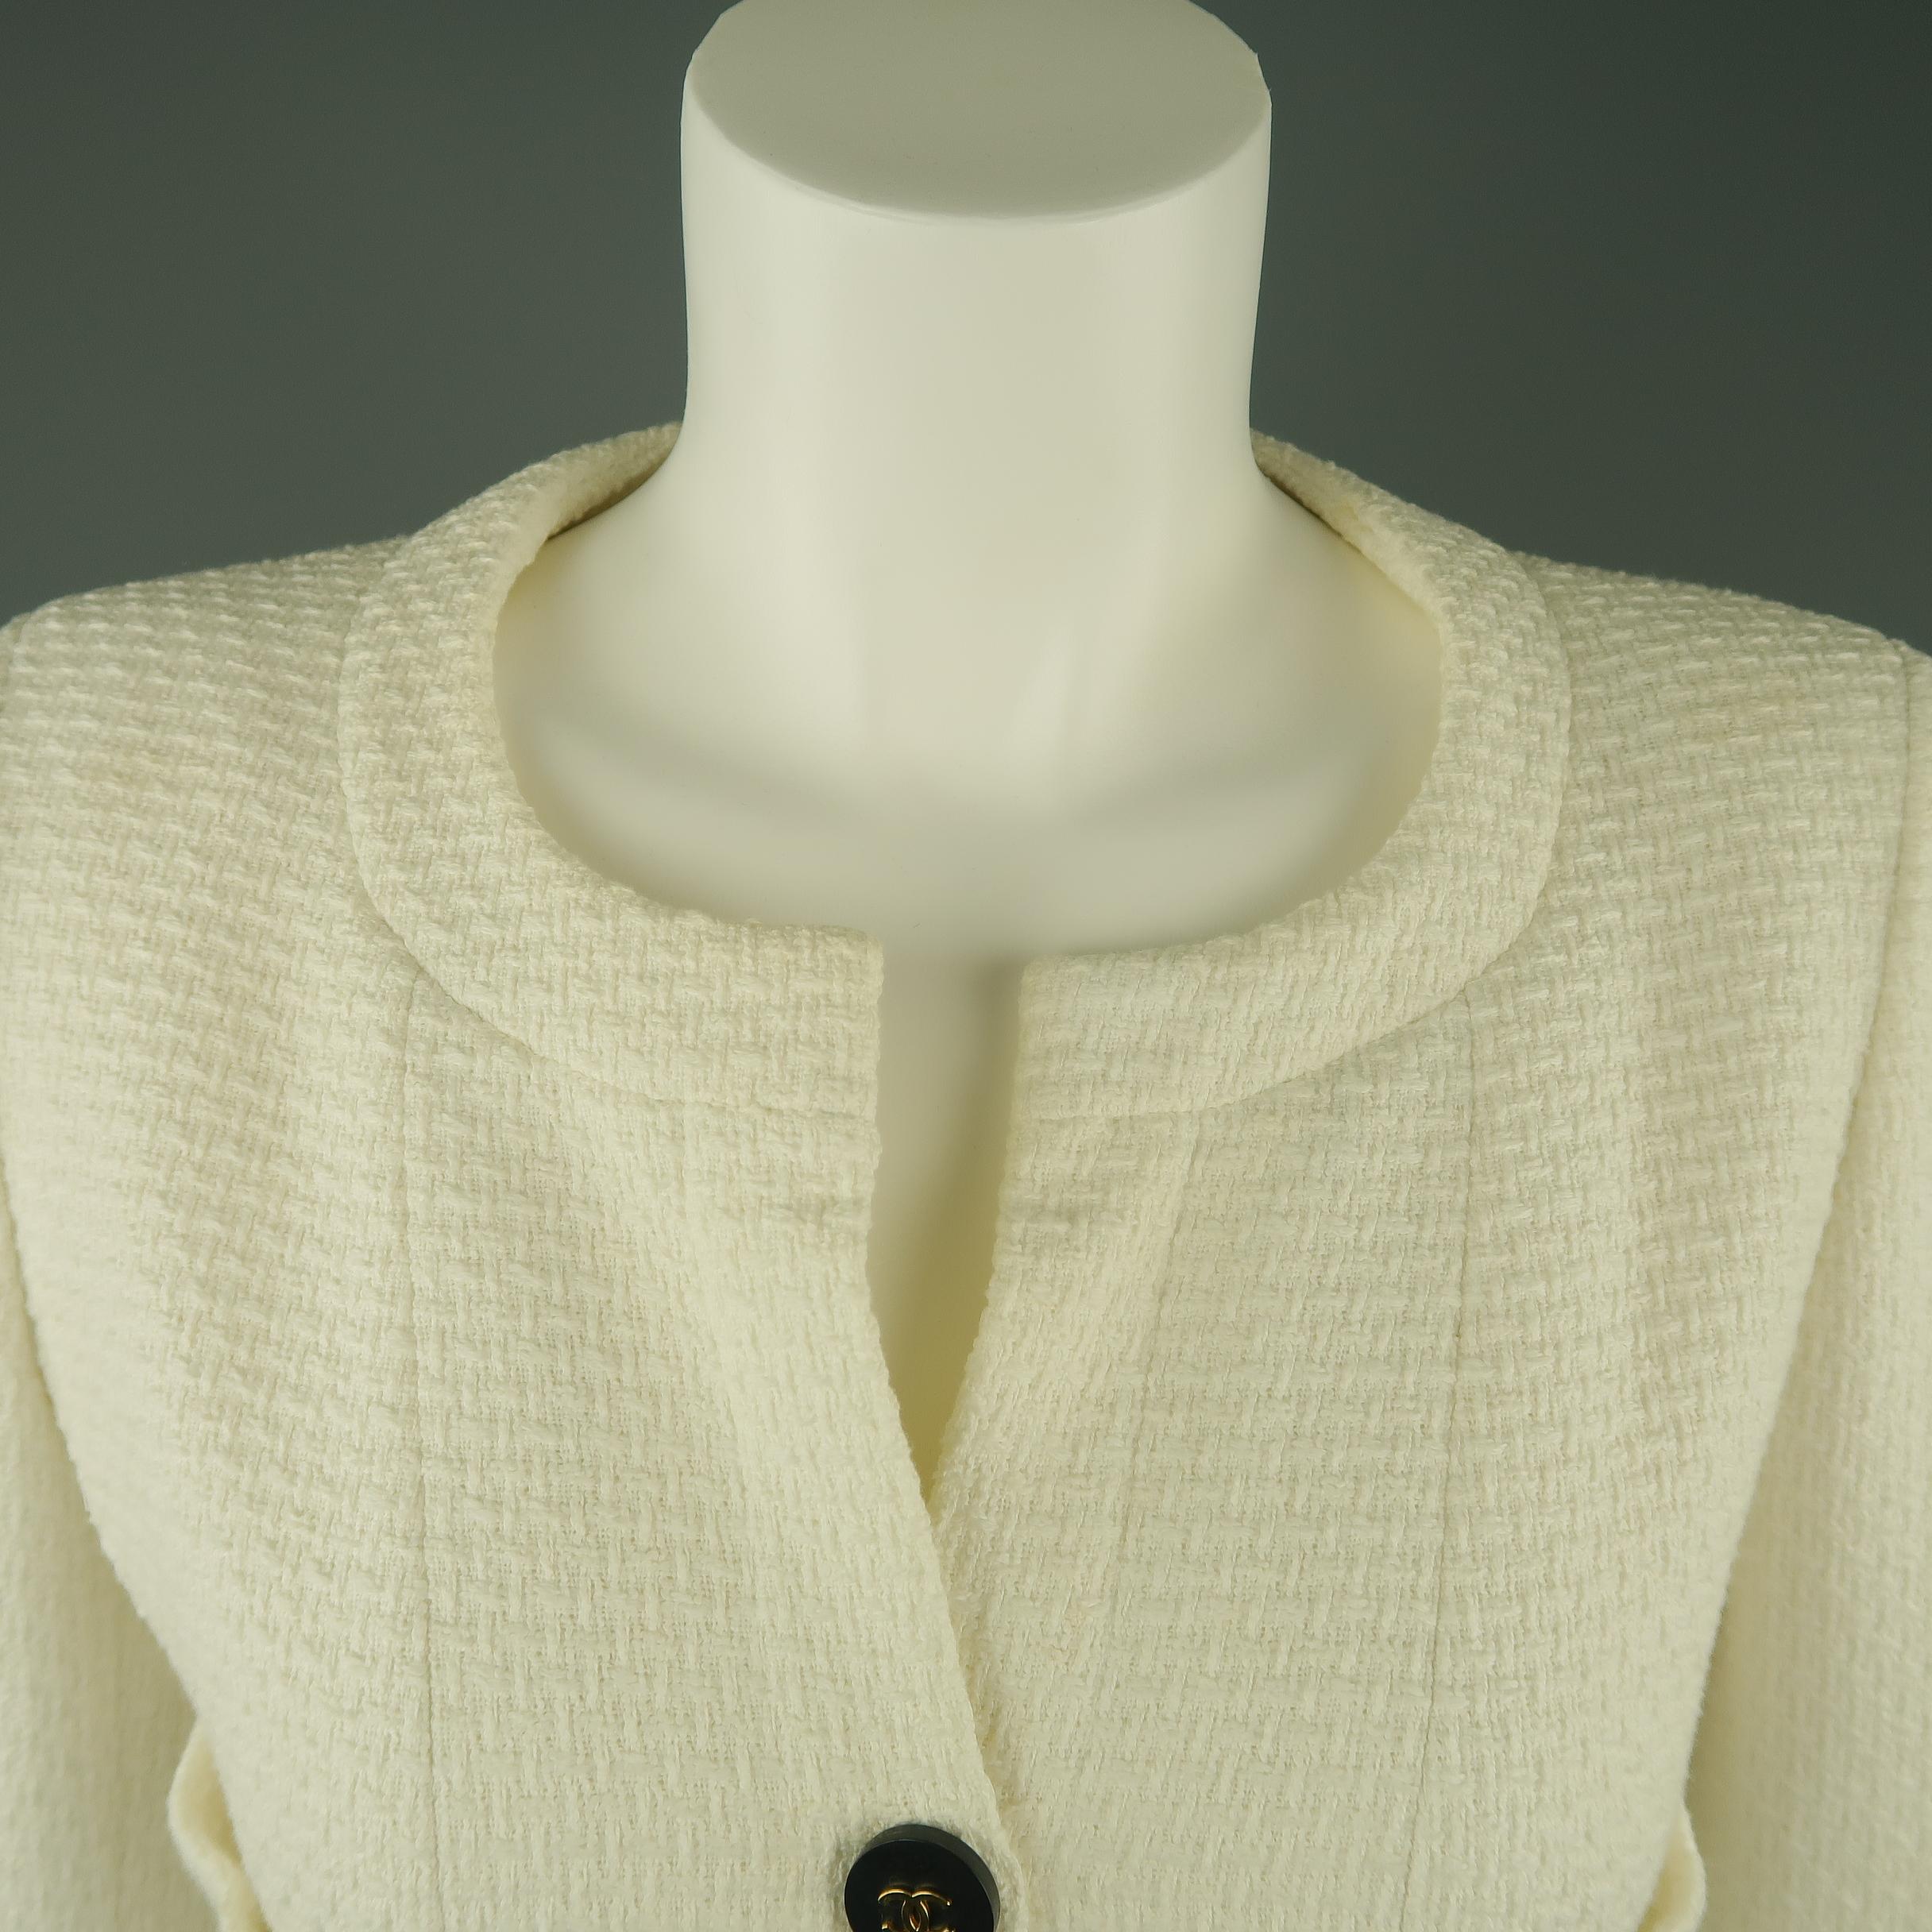 Vintage CHANEL BOUTIQUE cropped jacket from Spring Summer 1995 Collection comes in off white cotton tweed with a round slit neckline, three button closure with black and gold CC buttons, patch pockets, button cuffs, and silk liner. Minor